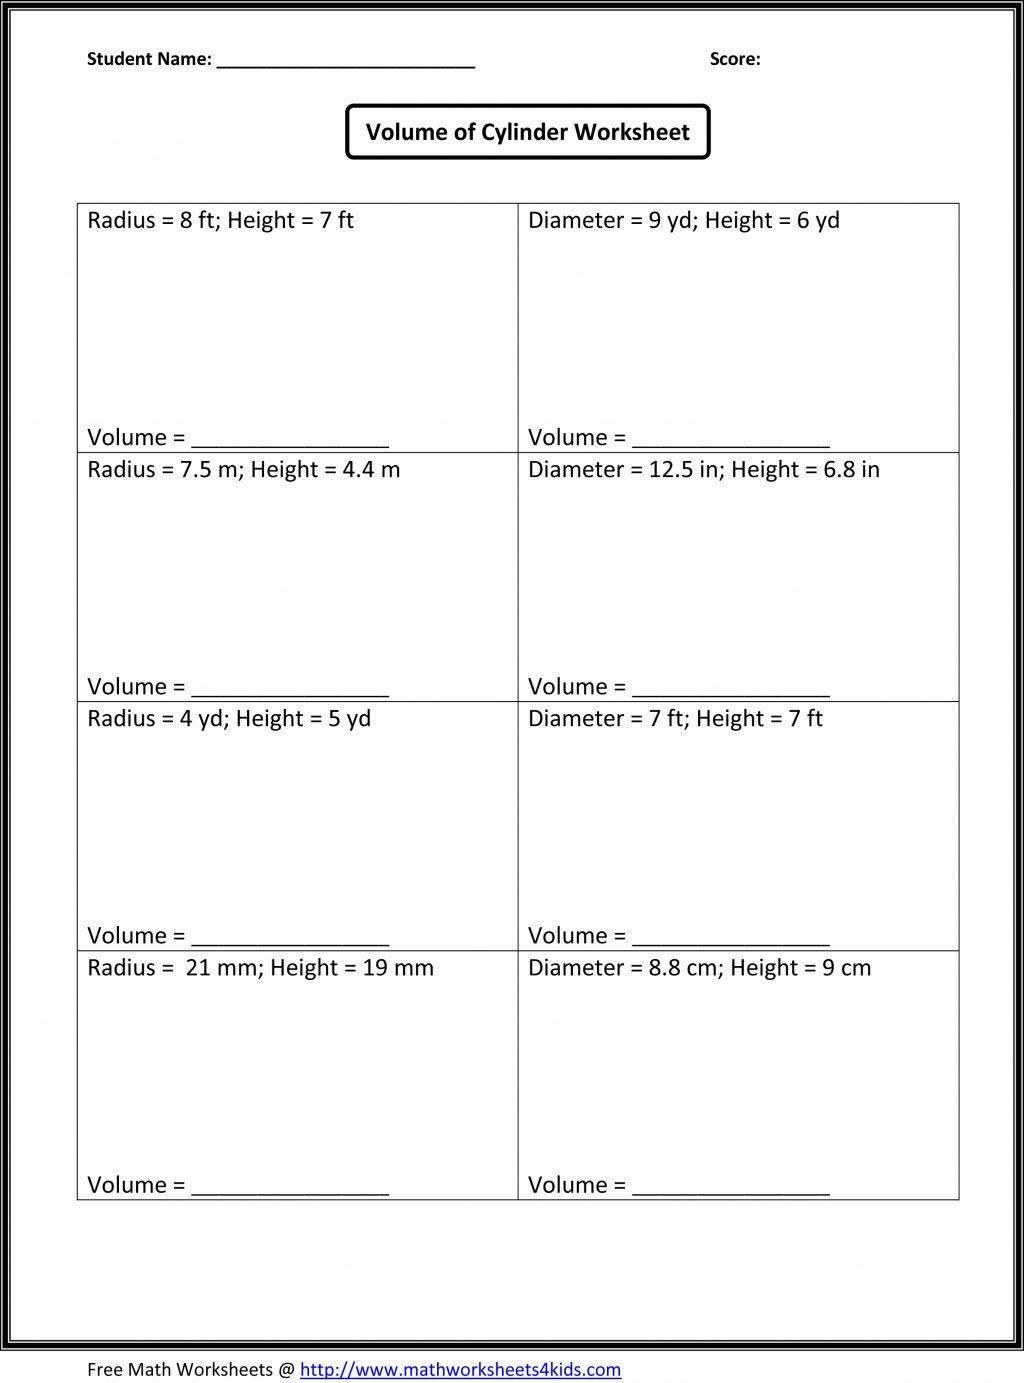 Common Core Math Worksheets With Answers For 4th Grade